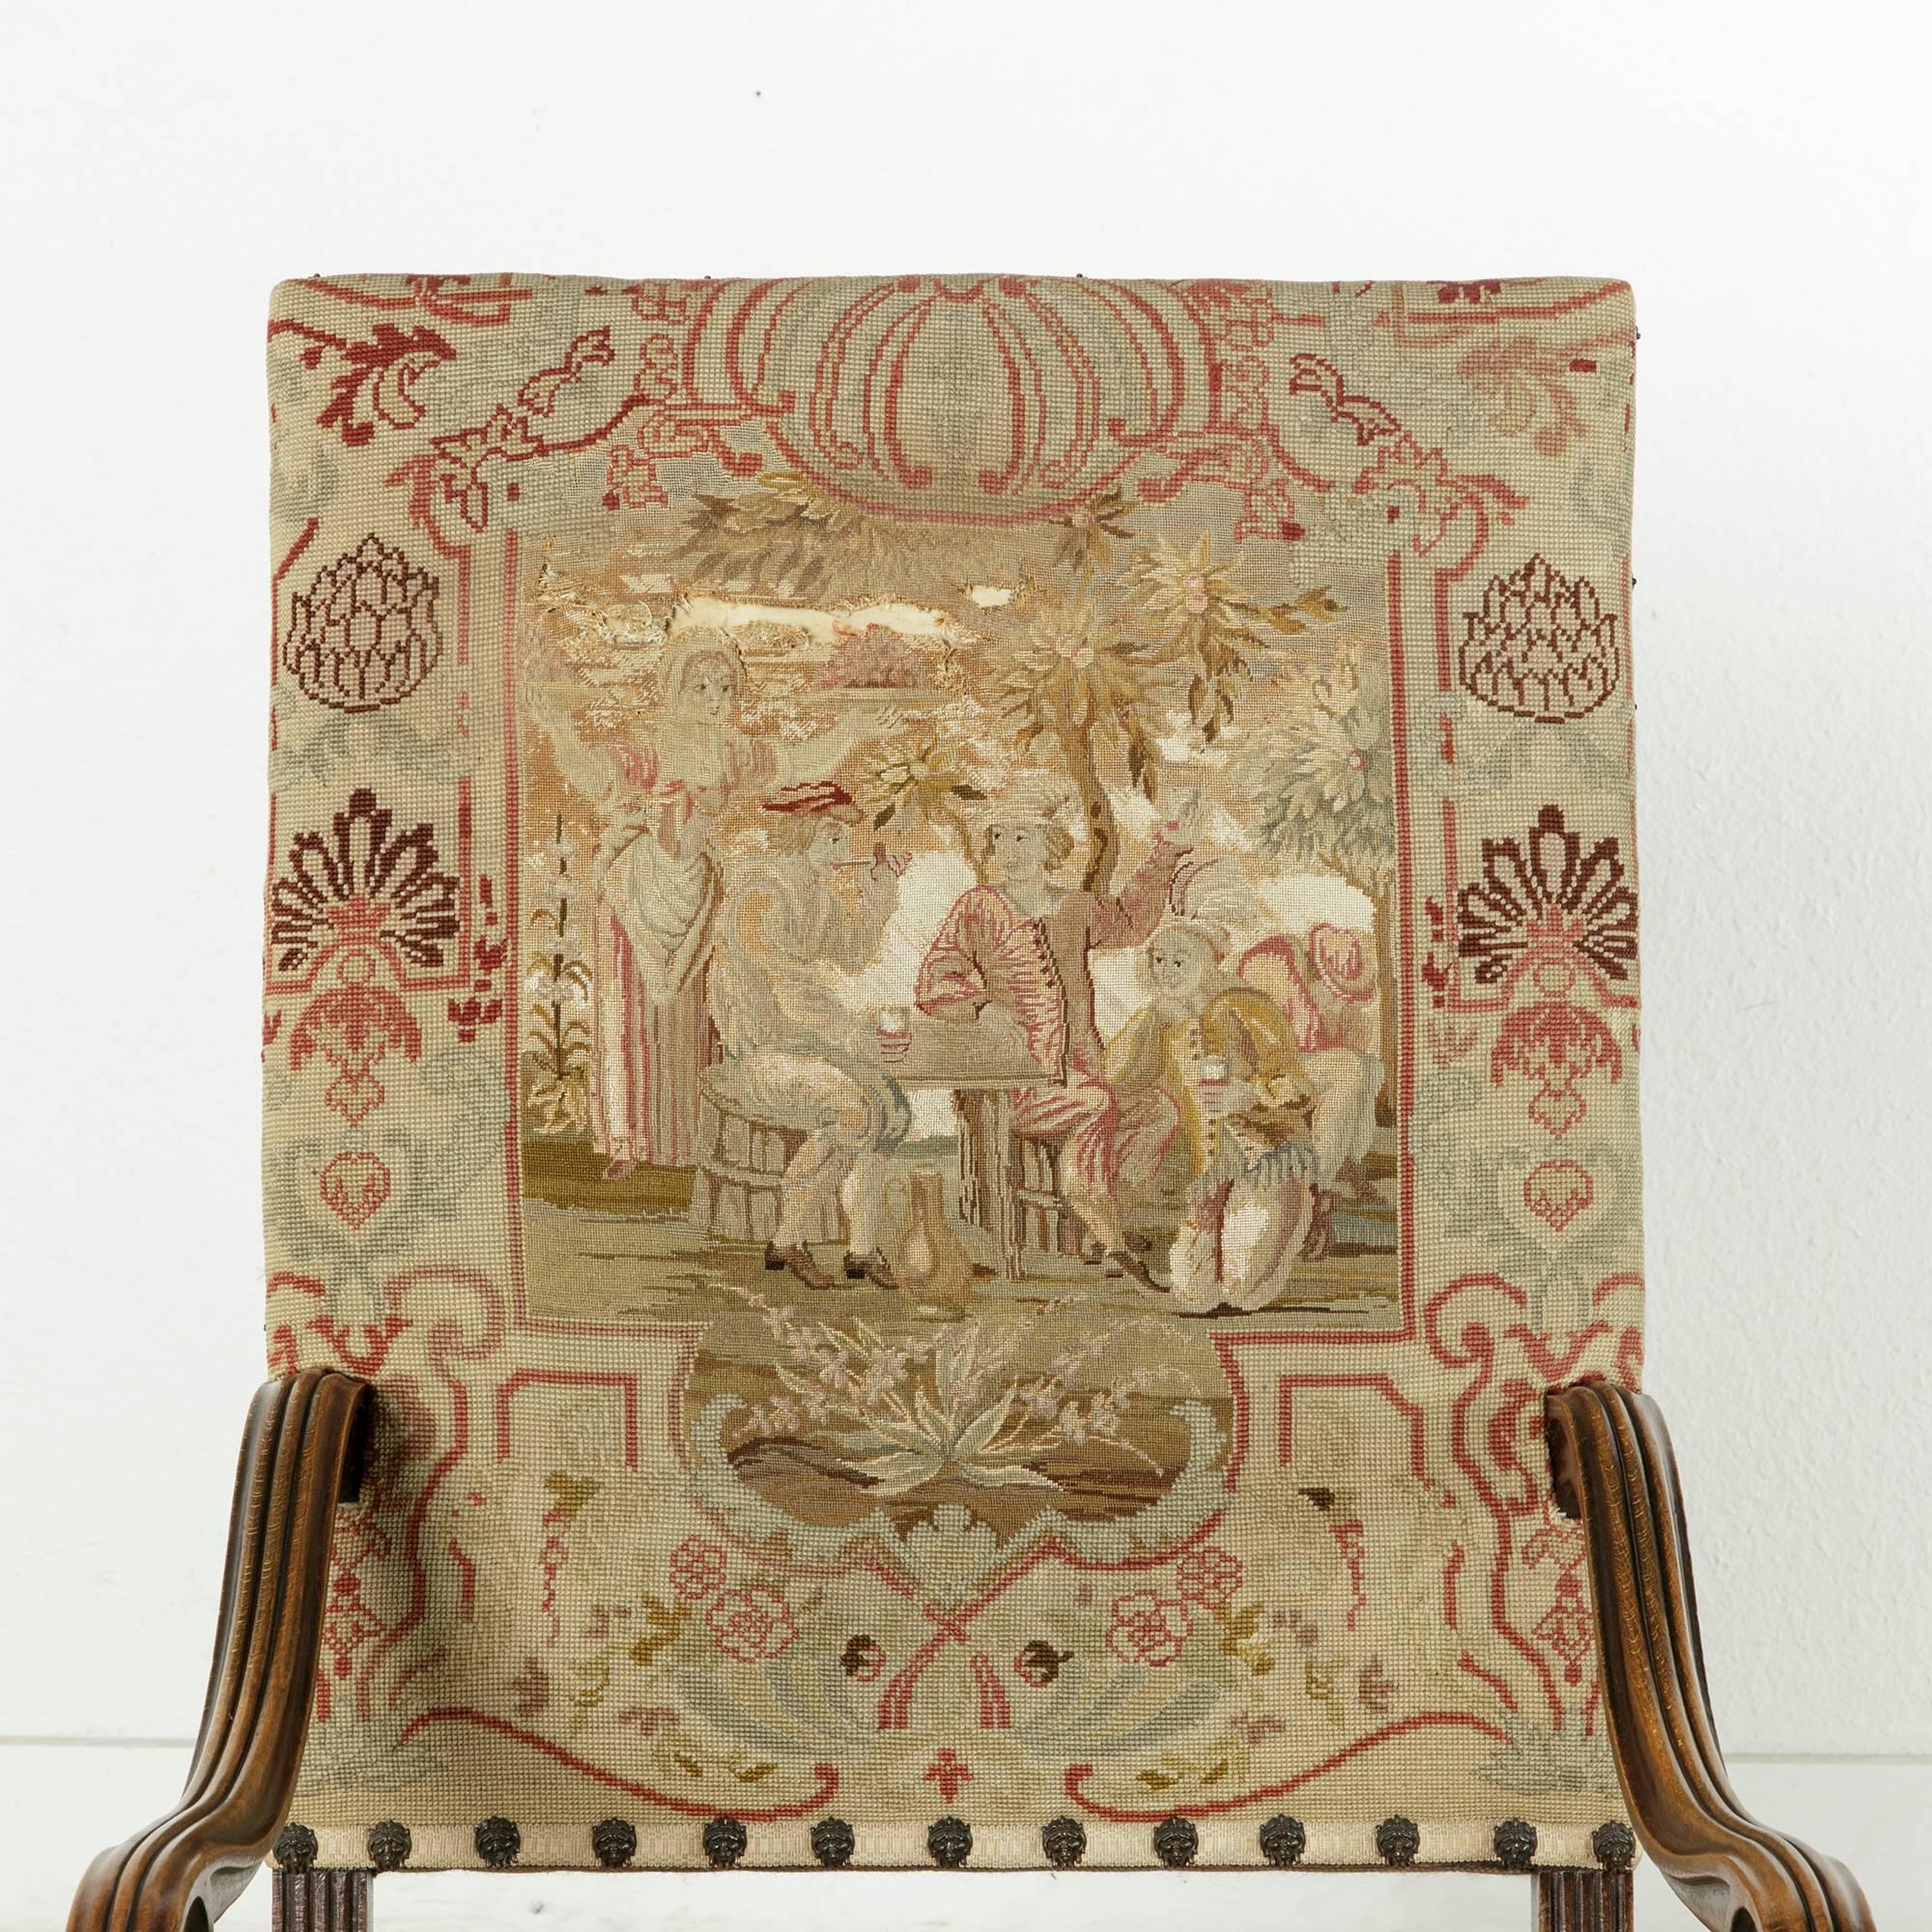 Hand-Carved 19th Century French Louis XIV Style Walnut Armchair with Original Needlepoint